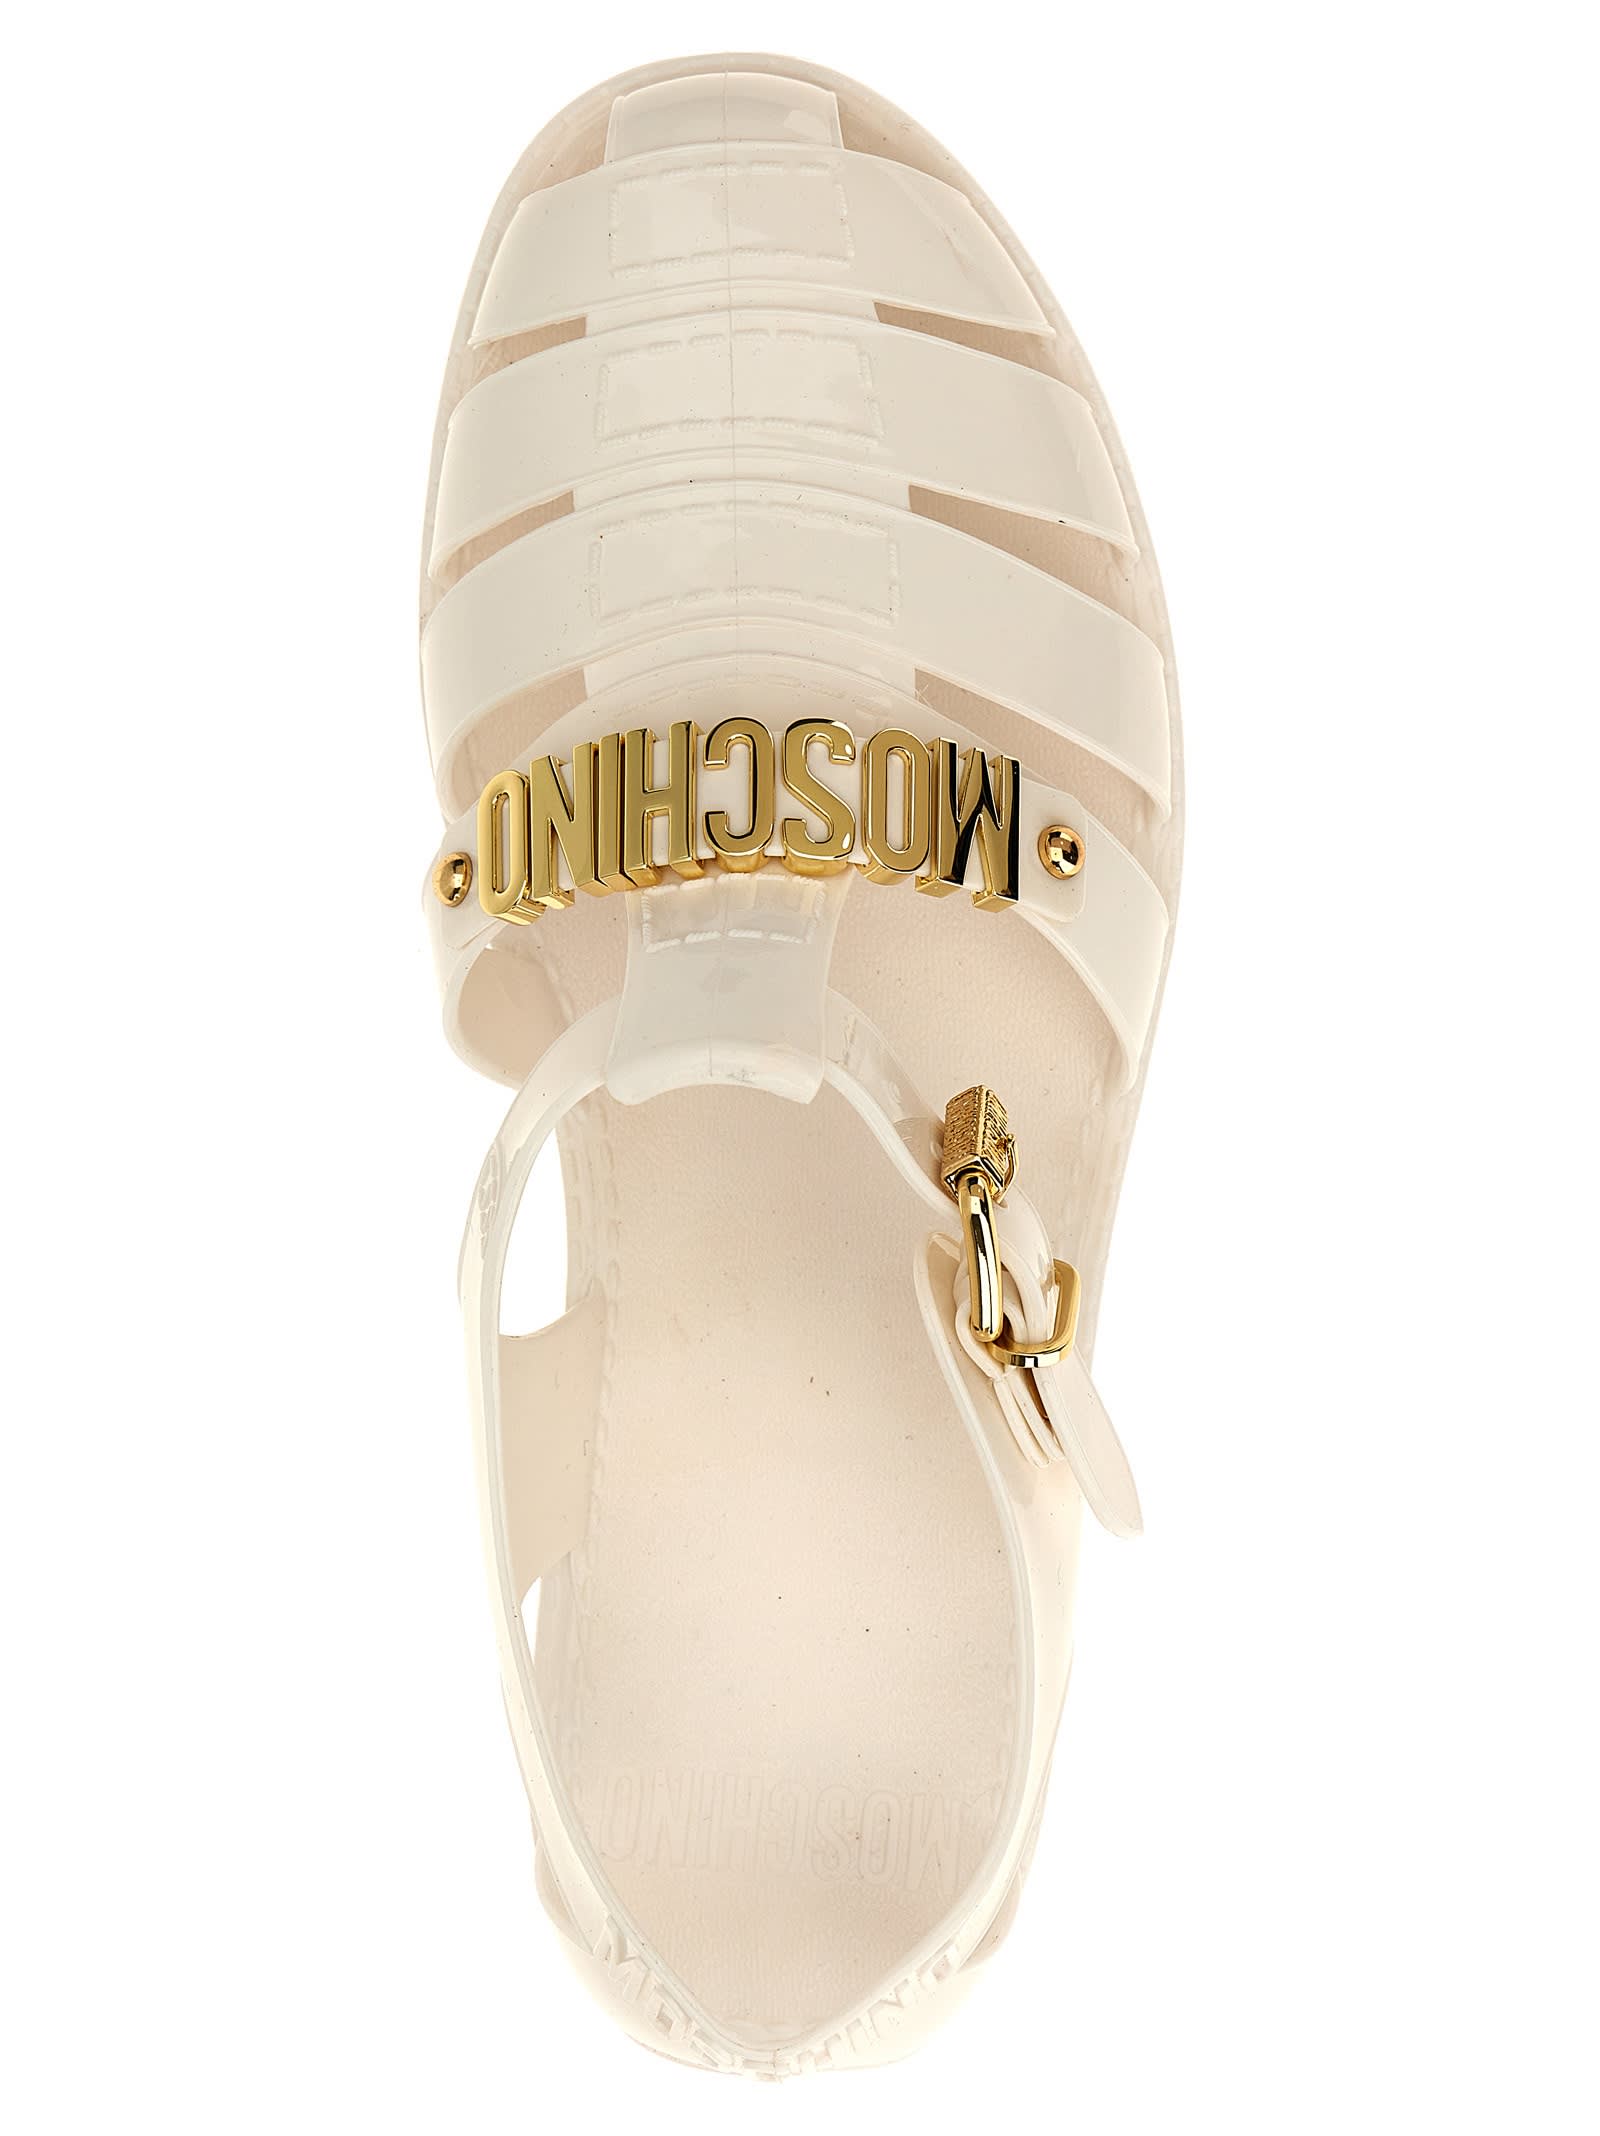 Shop Moschino Jelly Sandals In White